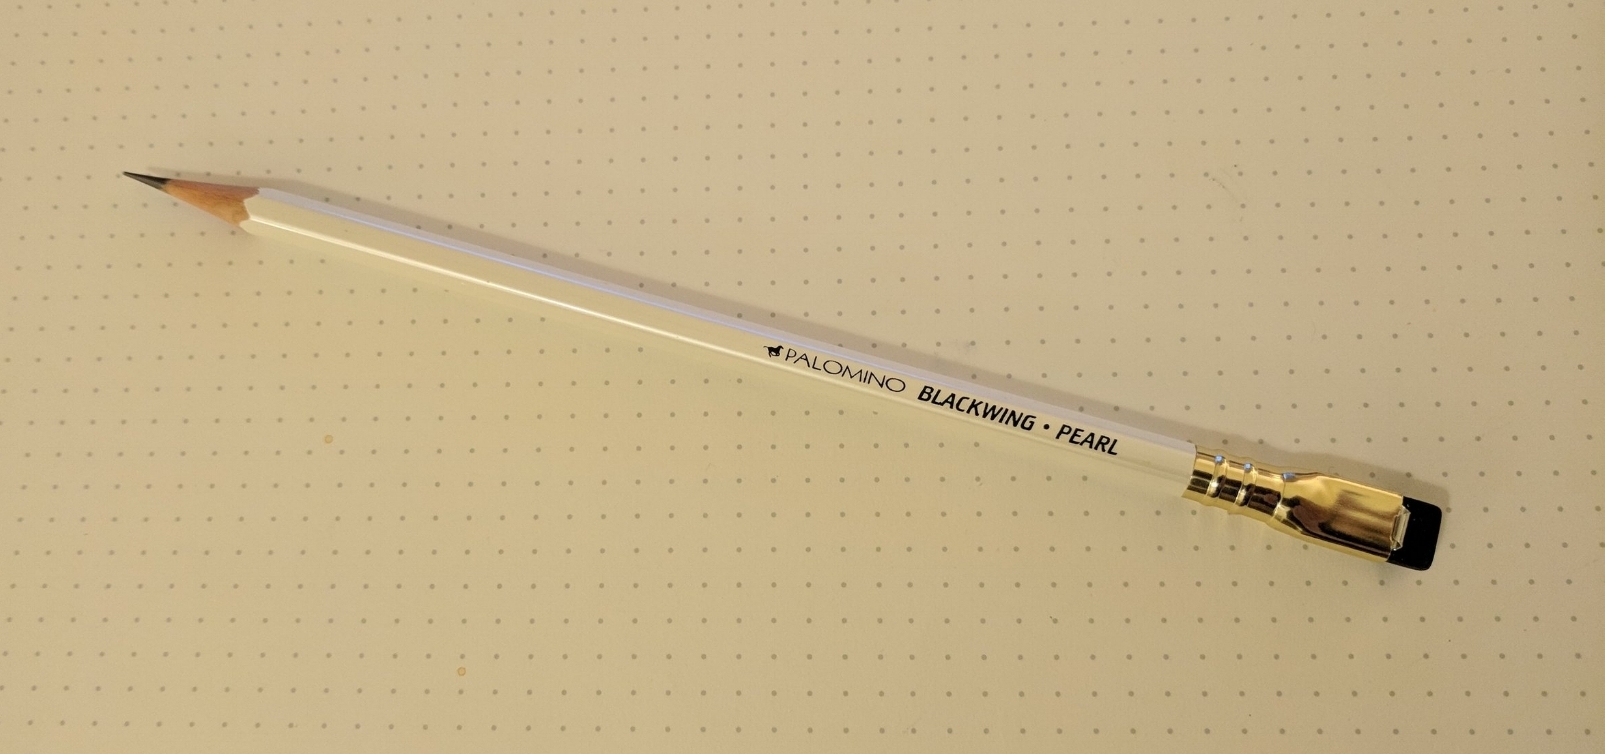 Palomino Blackwing Volumes Vol. 4 Pencils - Limited Edition - Pack